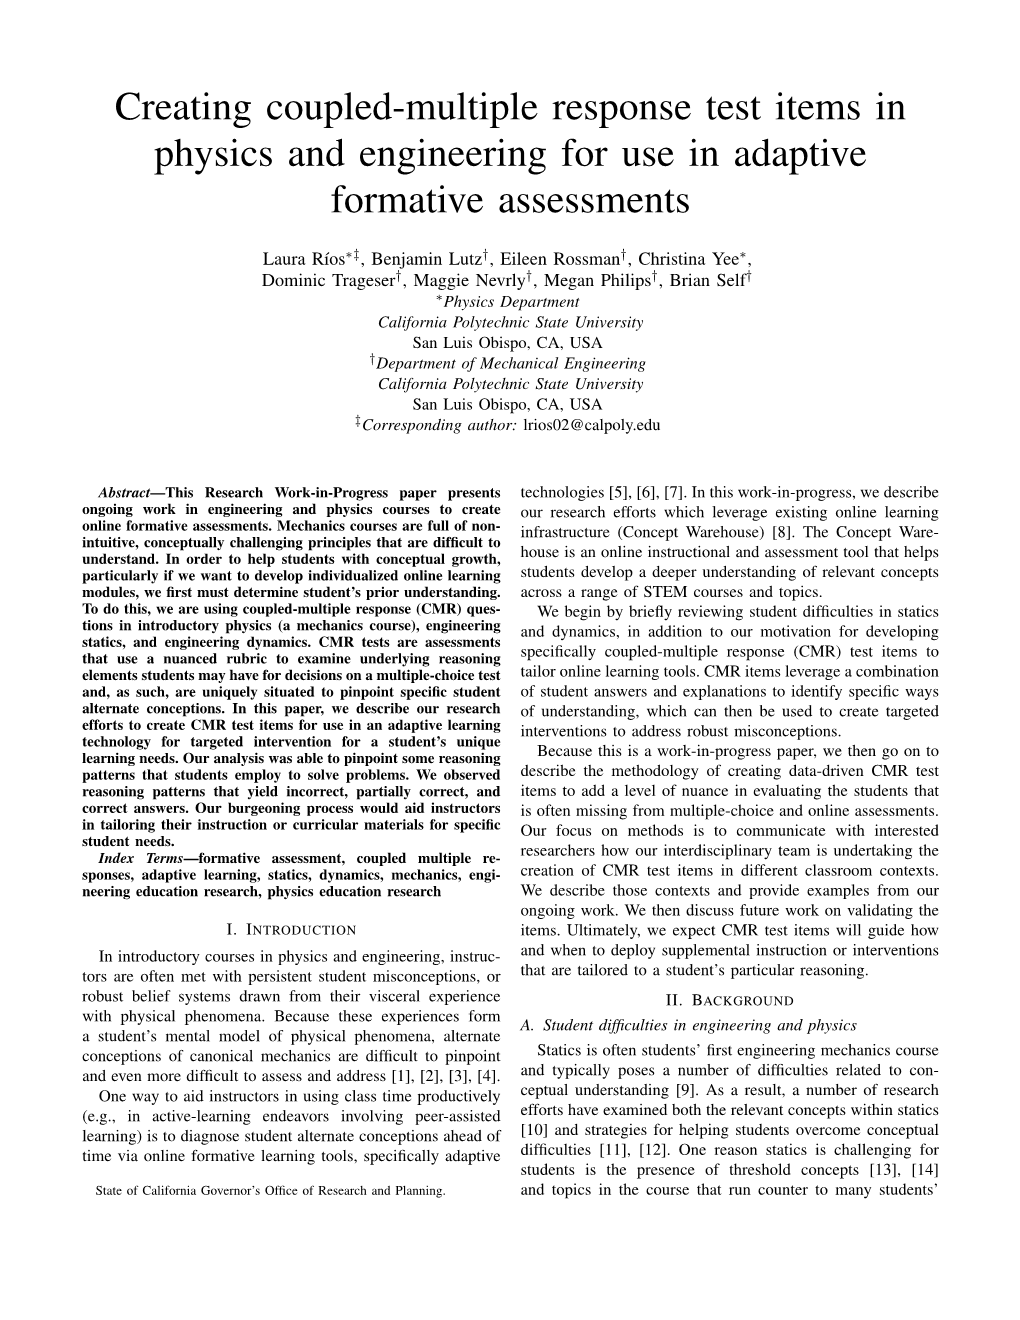 Creating Coupled-Multiple Response Test Items in Physics and Engineering for Use in Adaptive Formative Assessments